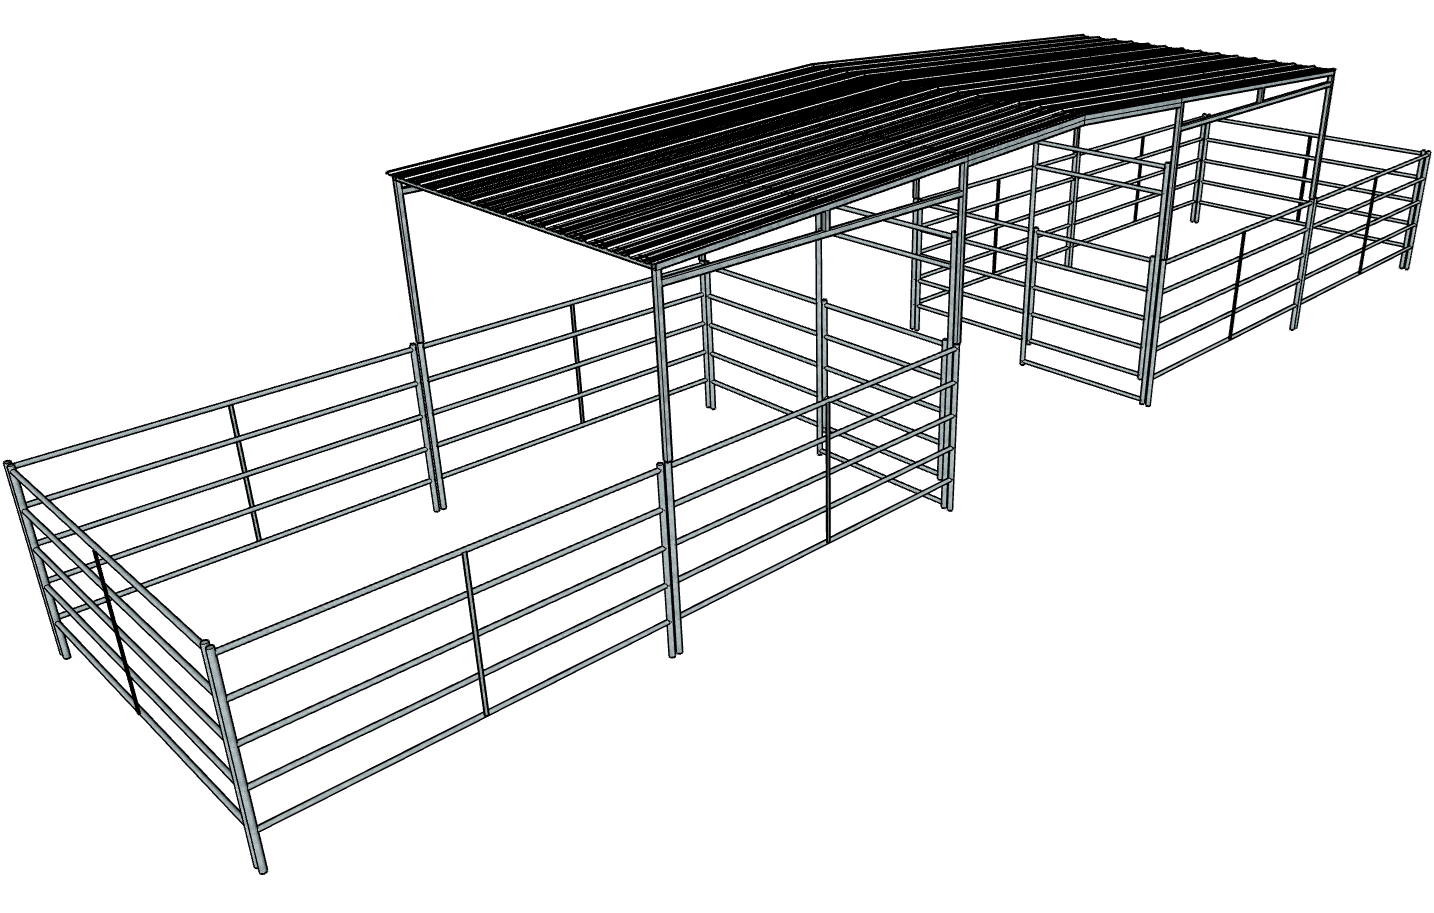 50 Ft X 10 Ft 5-Rail 2 Stall Barn Kit with 30 Ft by 10 Ft Gable Roof